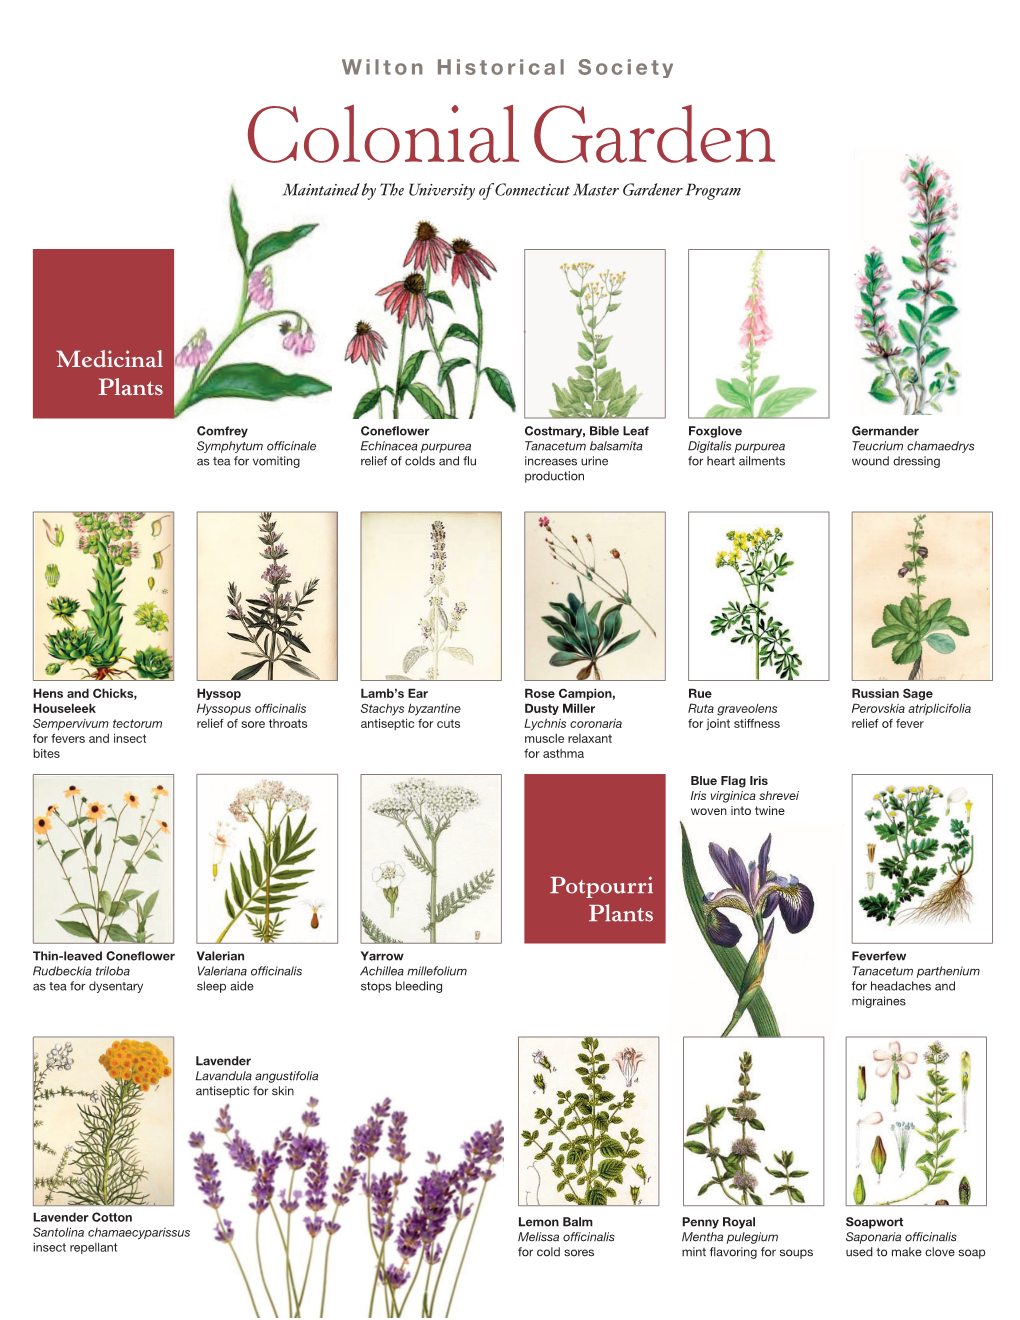 Printable Guide to Our Colonial Garden (PDF)